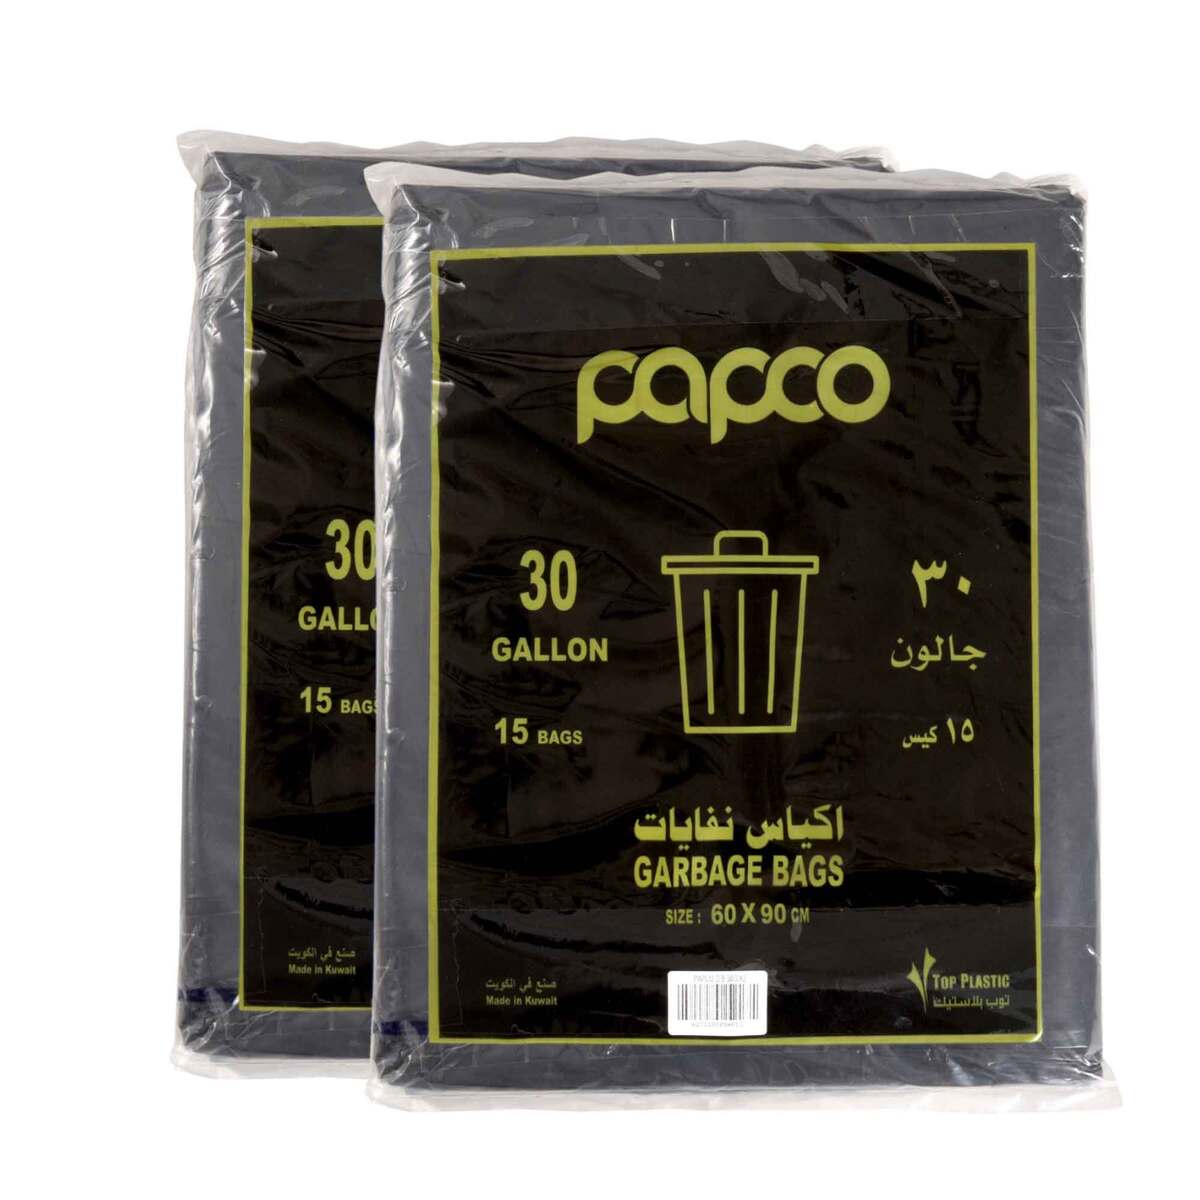 Buy Papco Garbage Bags 60 x 90cm 30 Gallons Value Pack 2 x 15 pcs Online at Best Price | 1/2 KD 1 KD 2 KD OFFERS | Lulu Kuwait in Kuwait